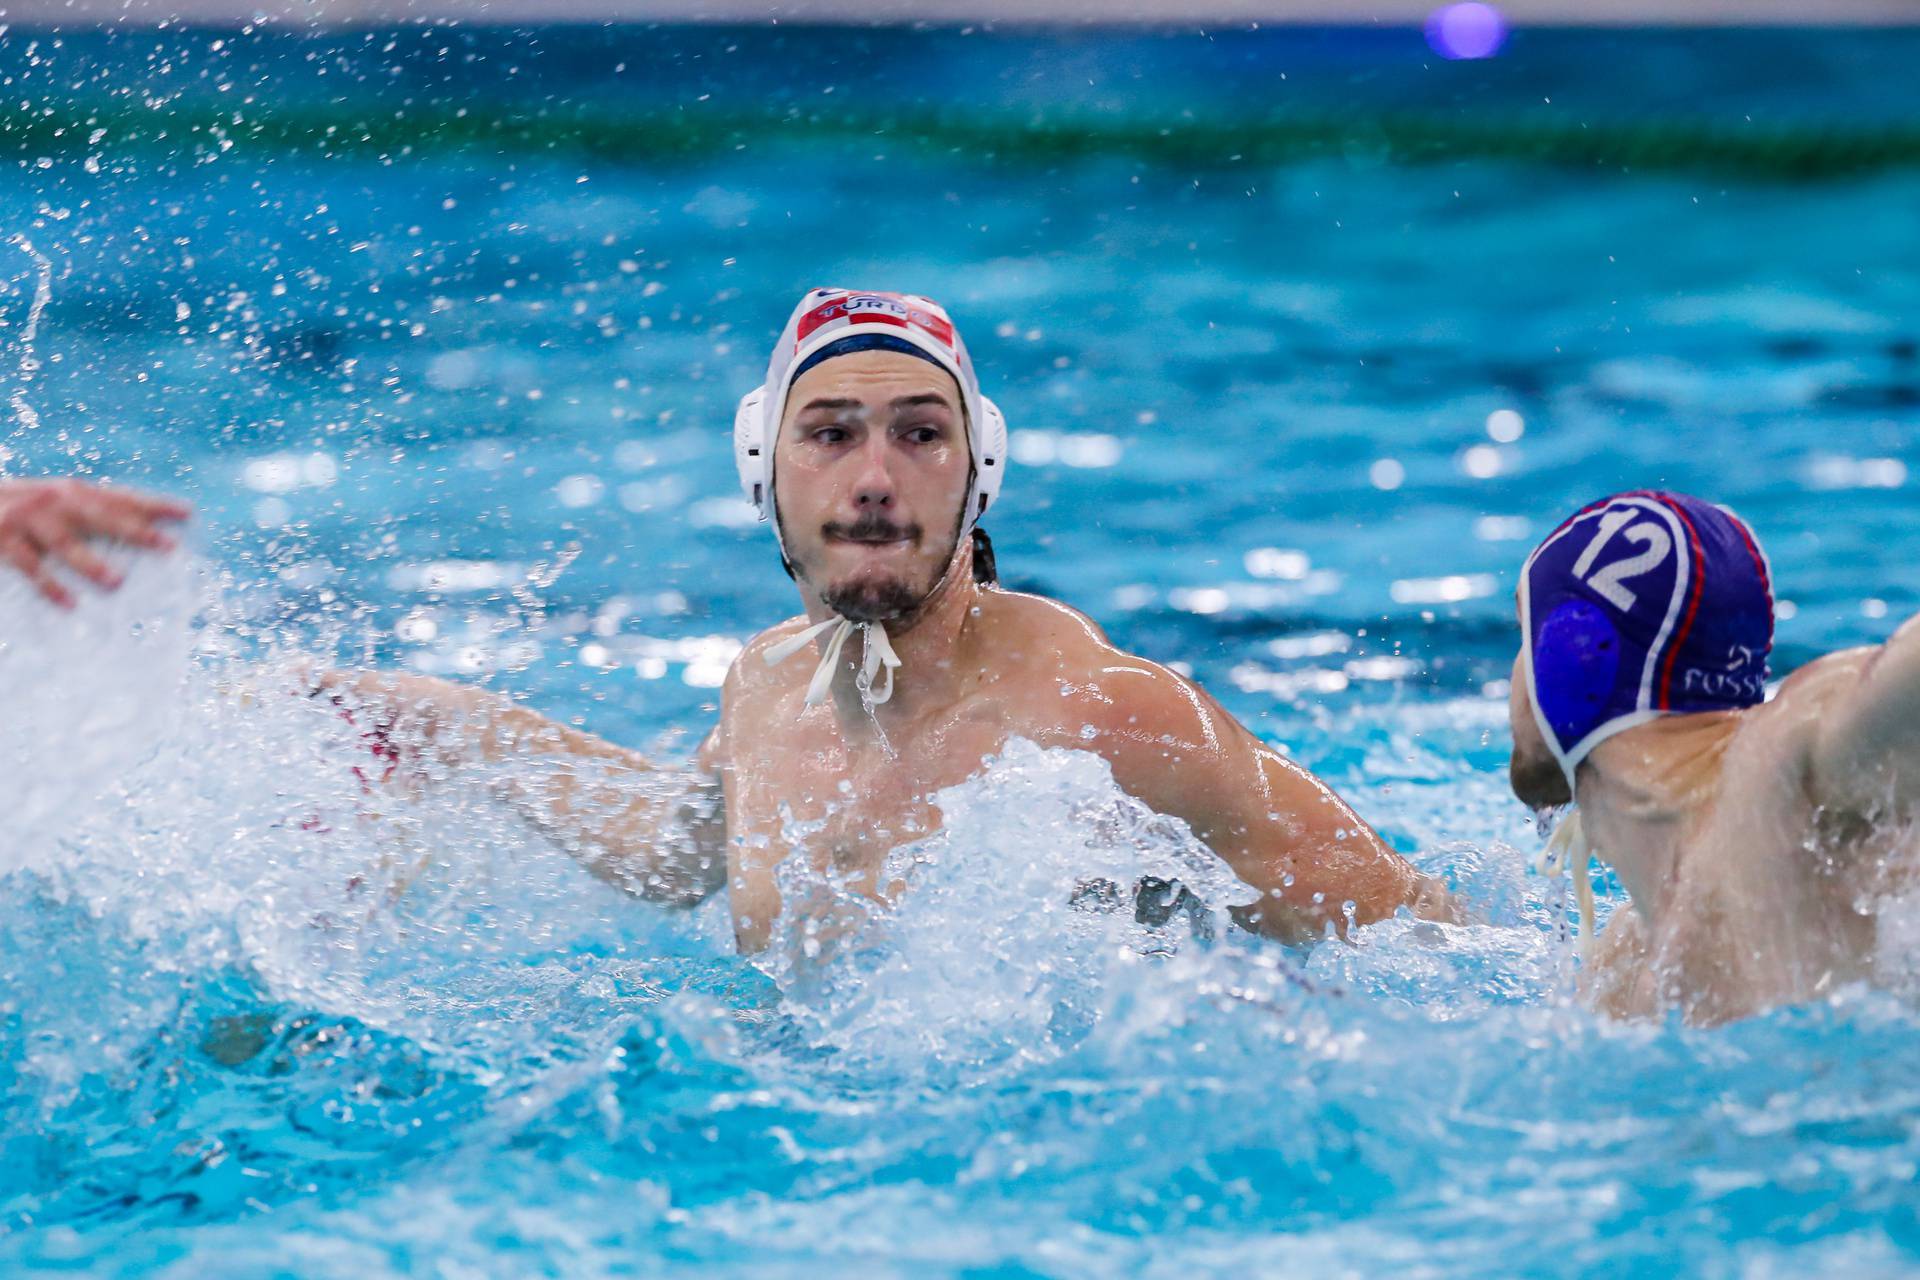 Croatia v Russia - Olympic Waterpolo Qualification Tournament 2021 